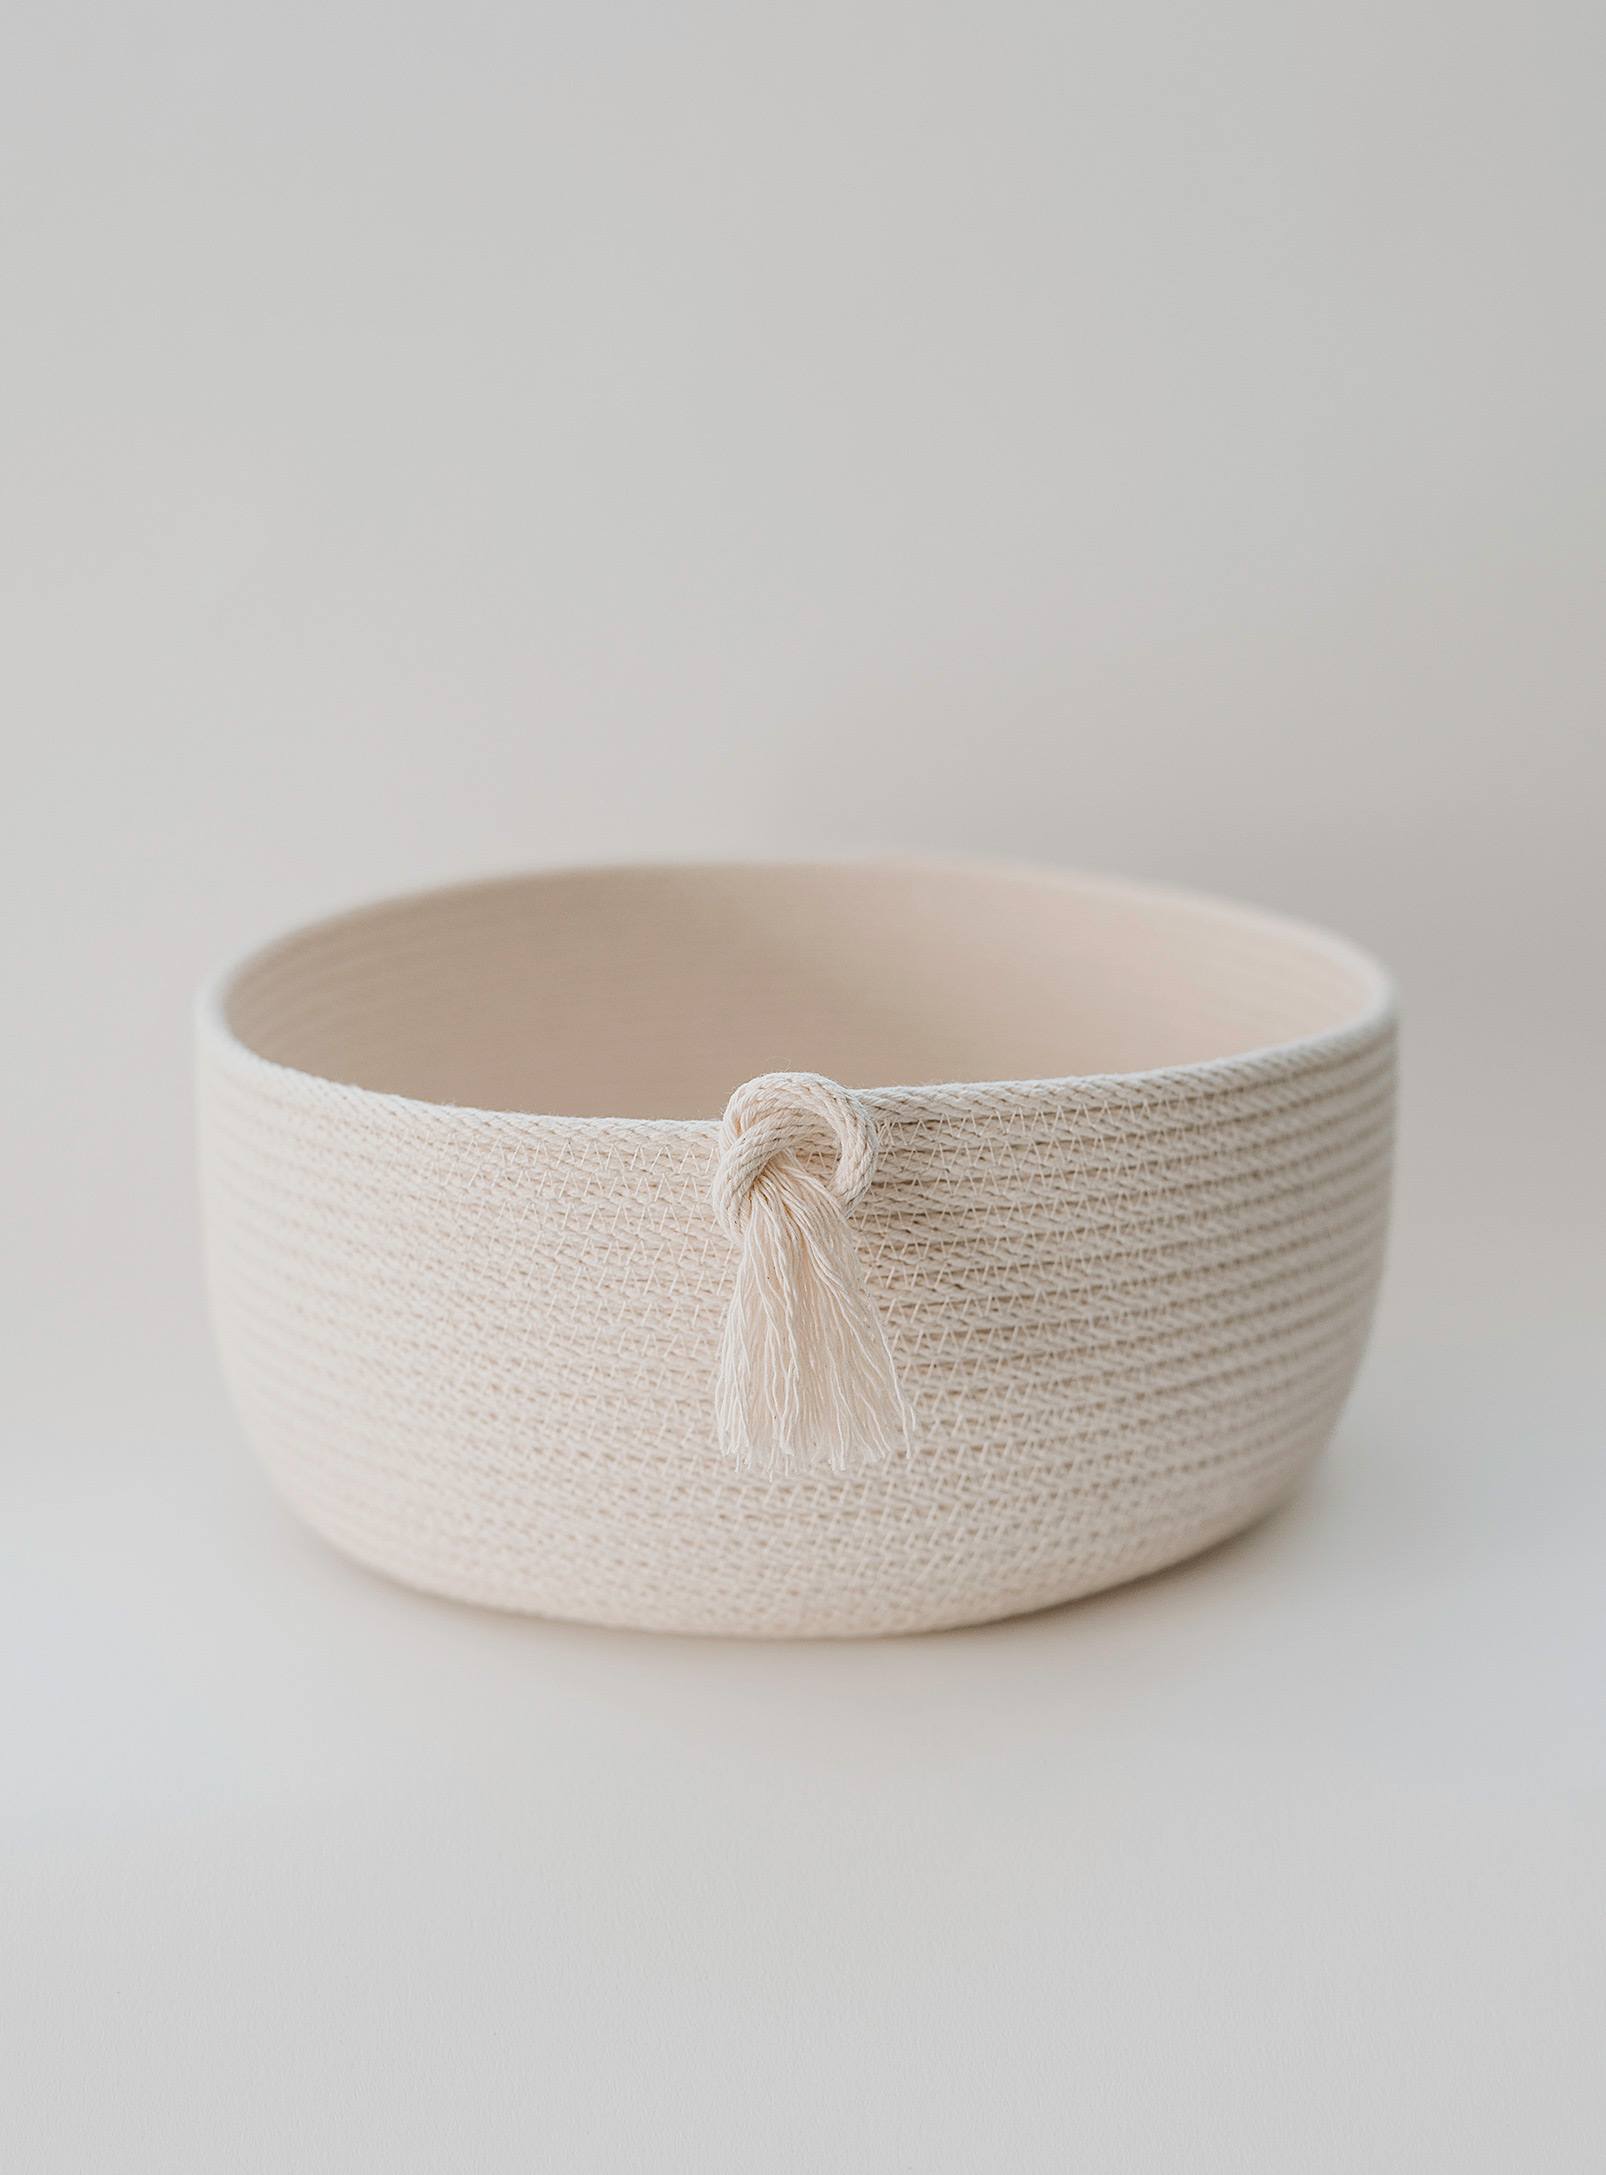 Warm, Wooly & Woven - Cotton rope knotted detail bowl